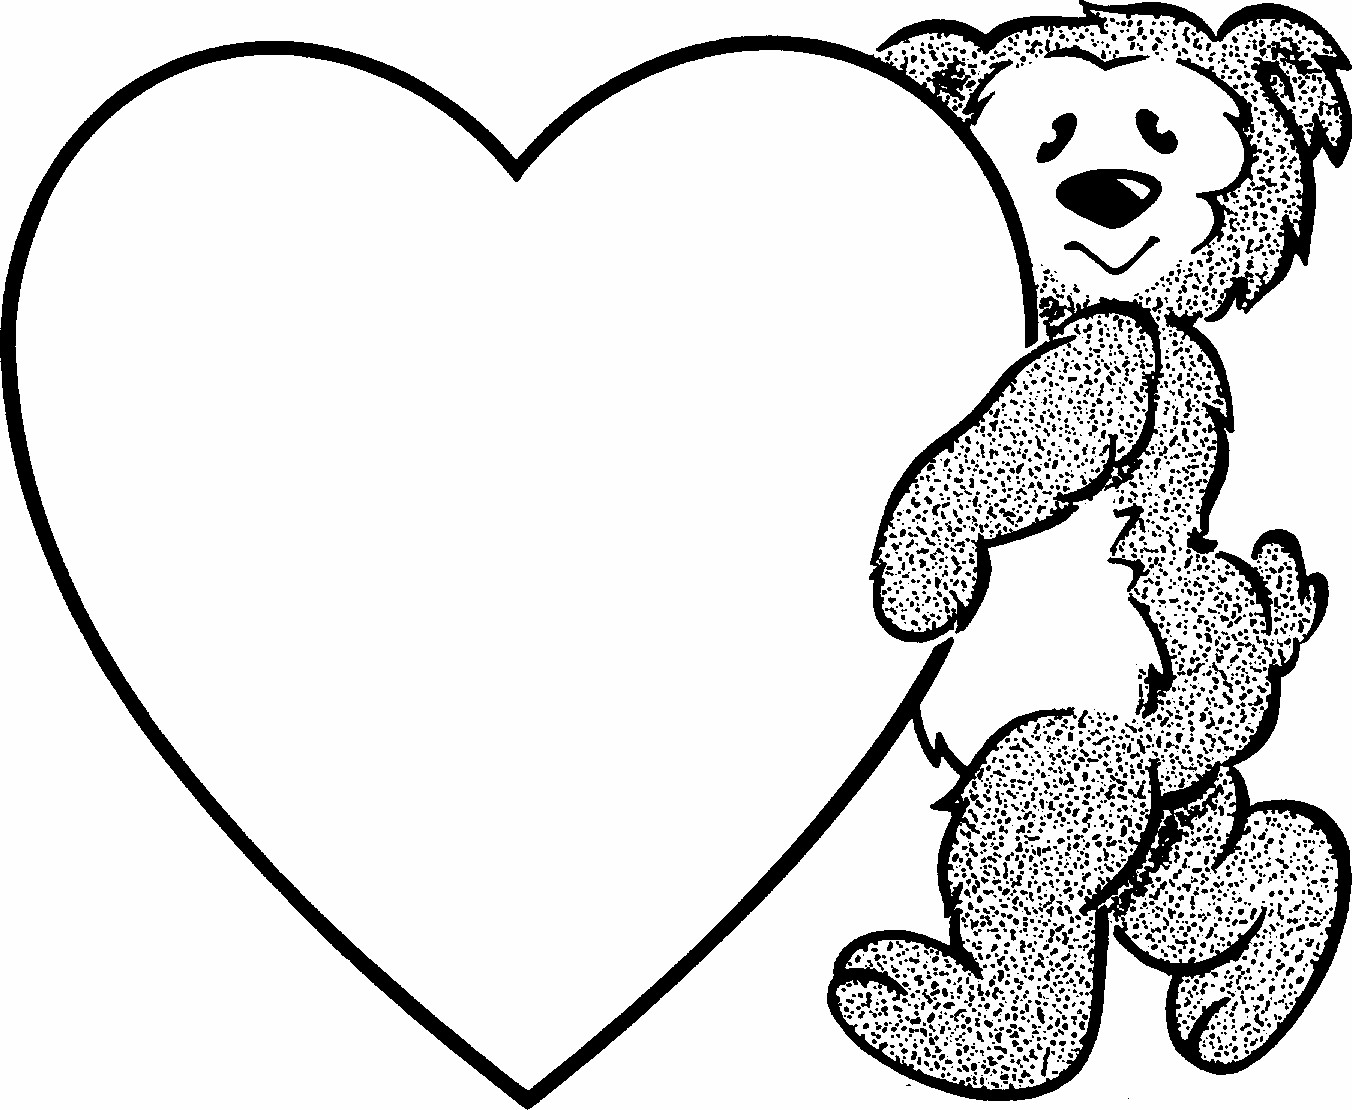 Heart With Wings Coloring Page Images & Pictures - Becuo